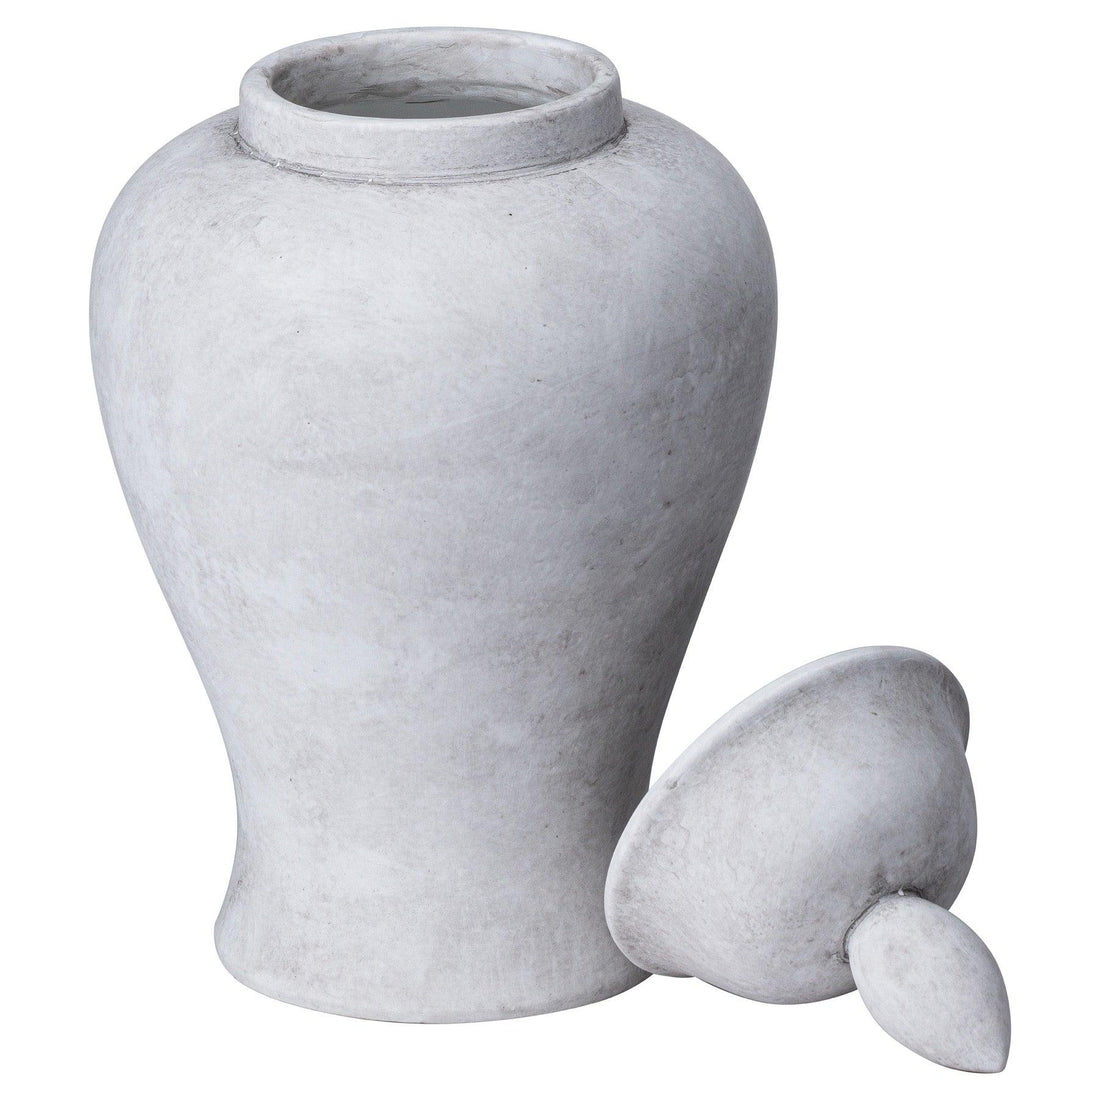 Darcy Stone Ginger Jar - £44.95 - Gifts & Accessories > Ornaments 